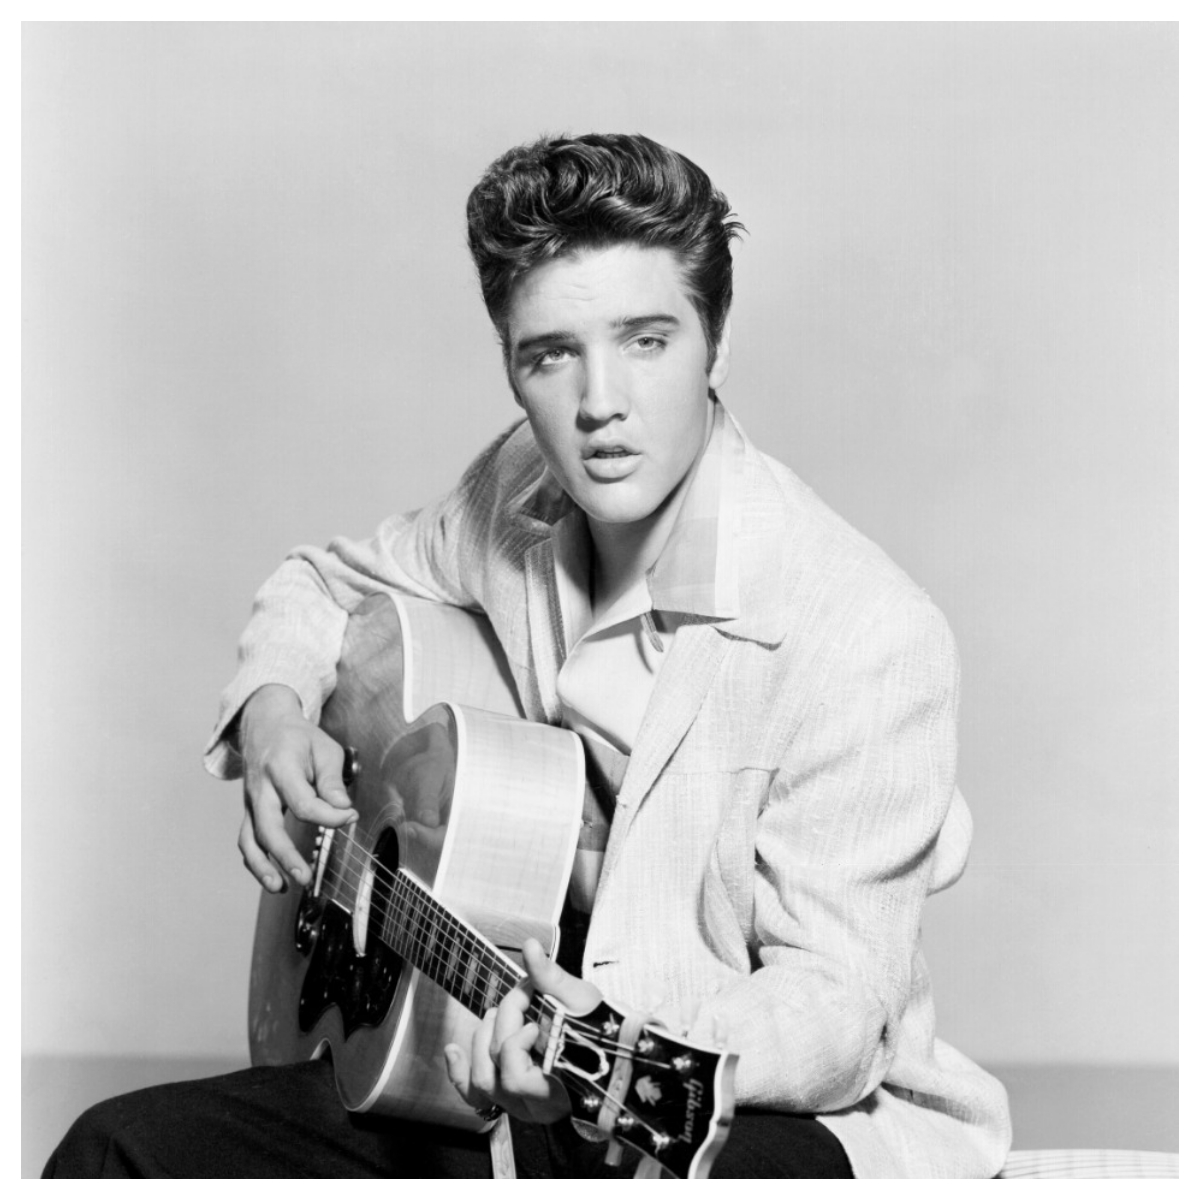 Elvis Presley: Death facts about the King that are still unknown